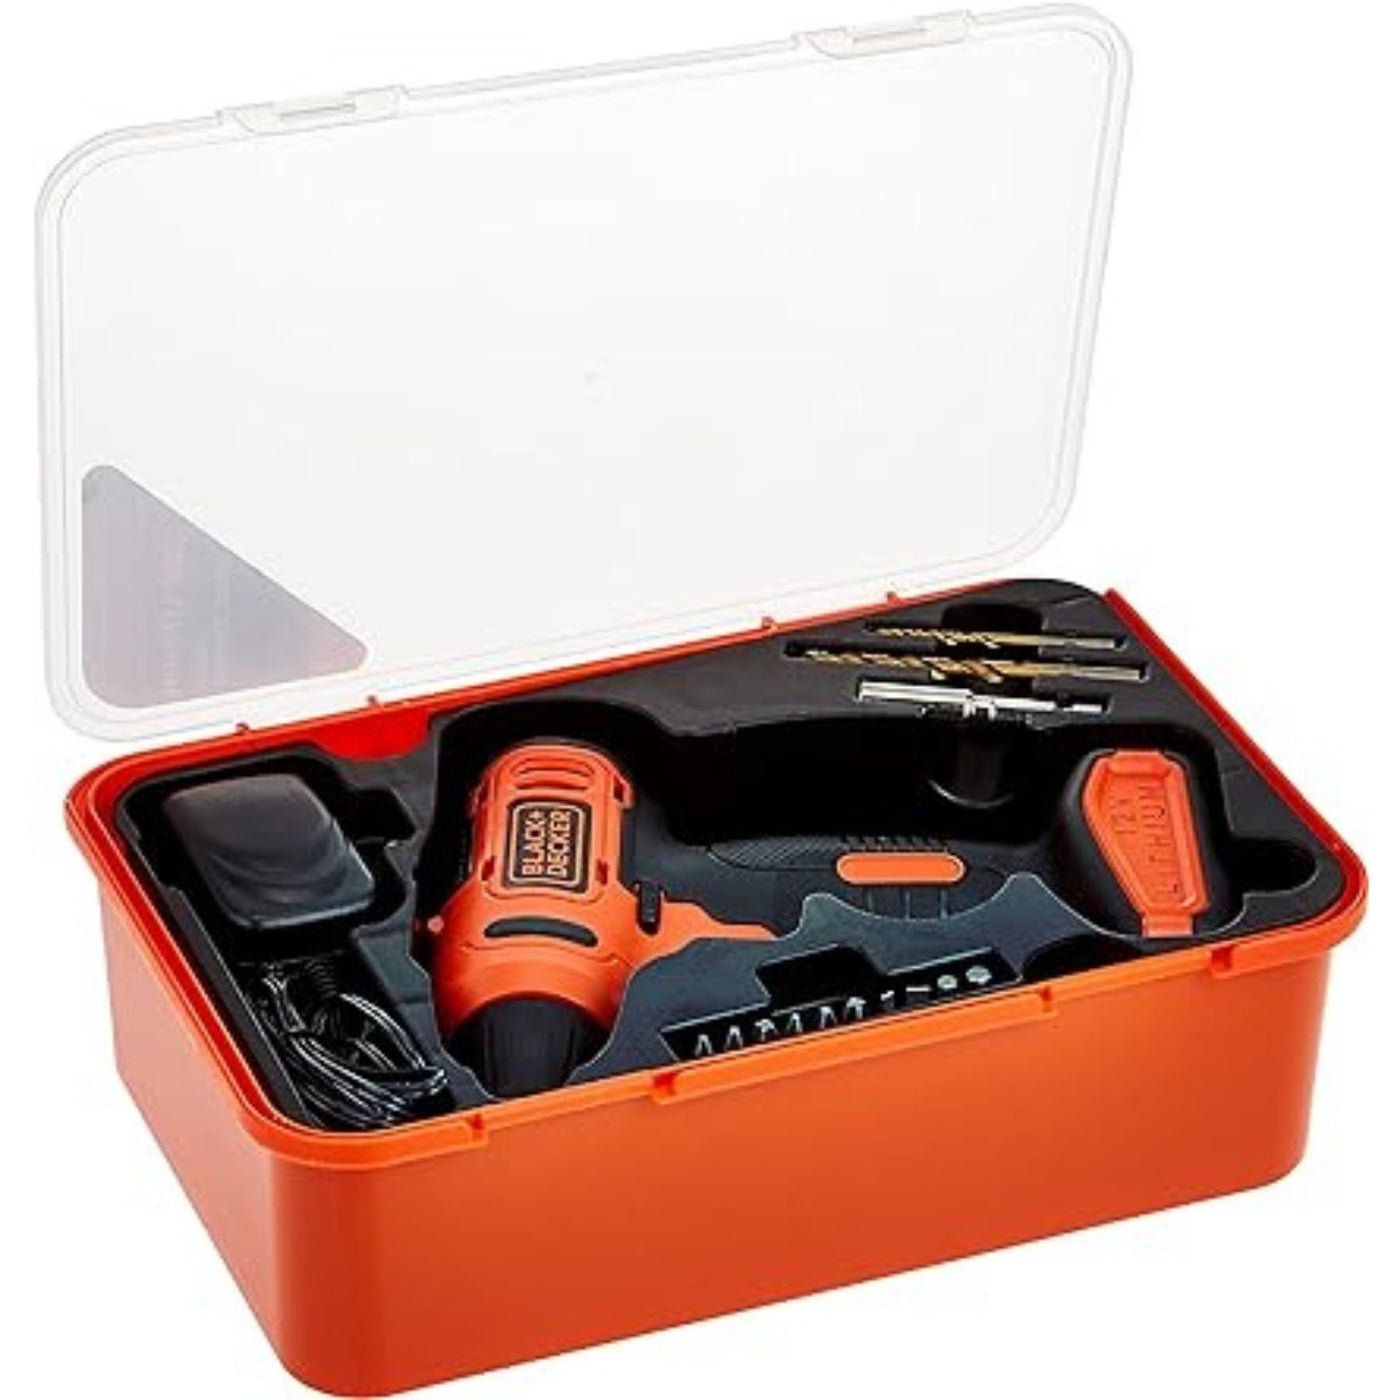 12V 1.5Ah 900 RPM Cordless Drill Driver with 13 Pieces Bits in Kitbox For Drilling and Fastening